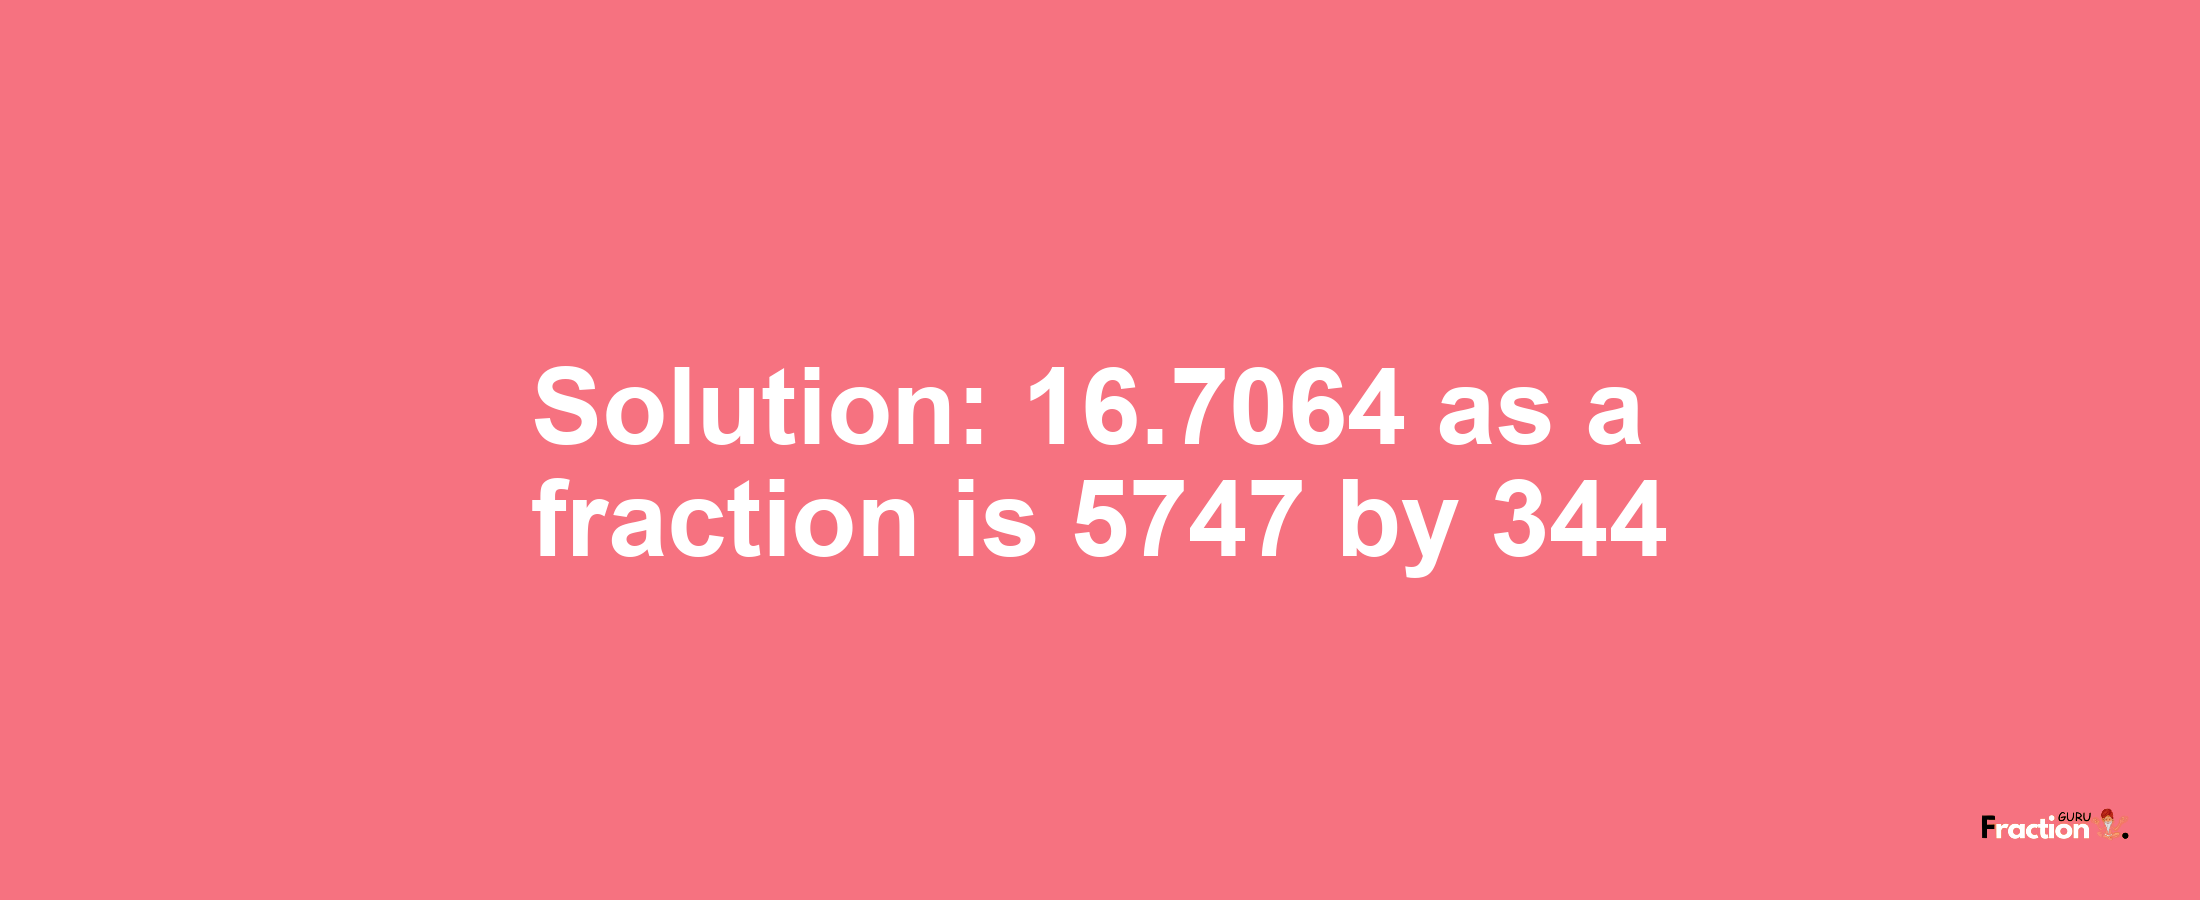 Solution:16.7064 as a fraction is 5747/344